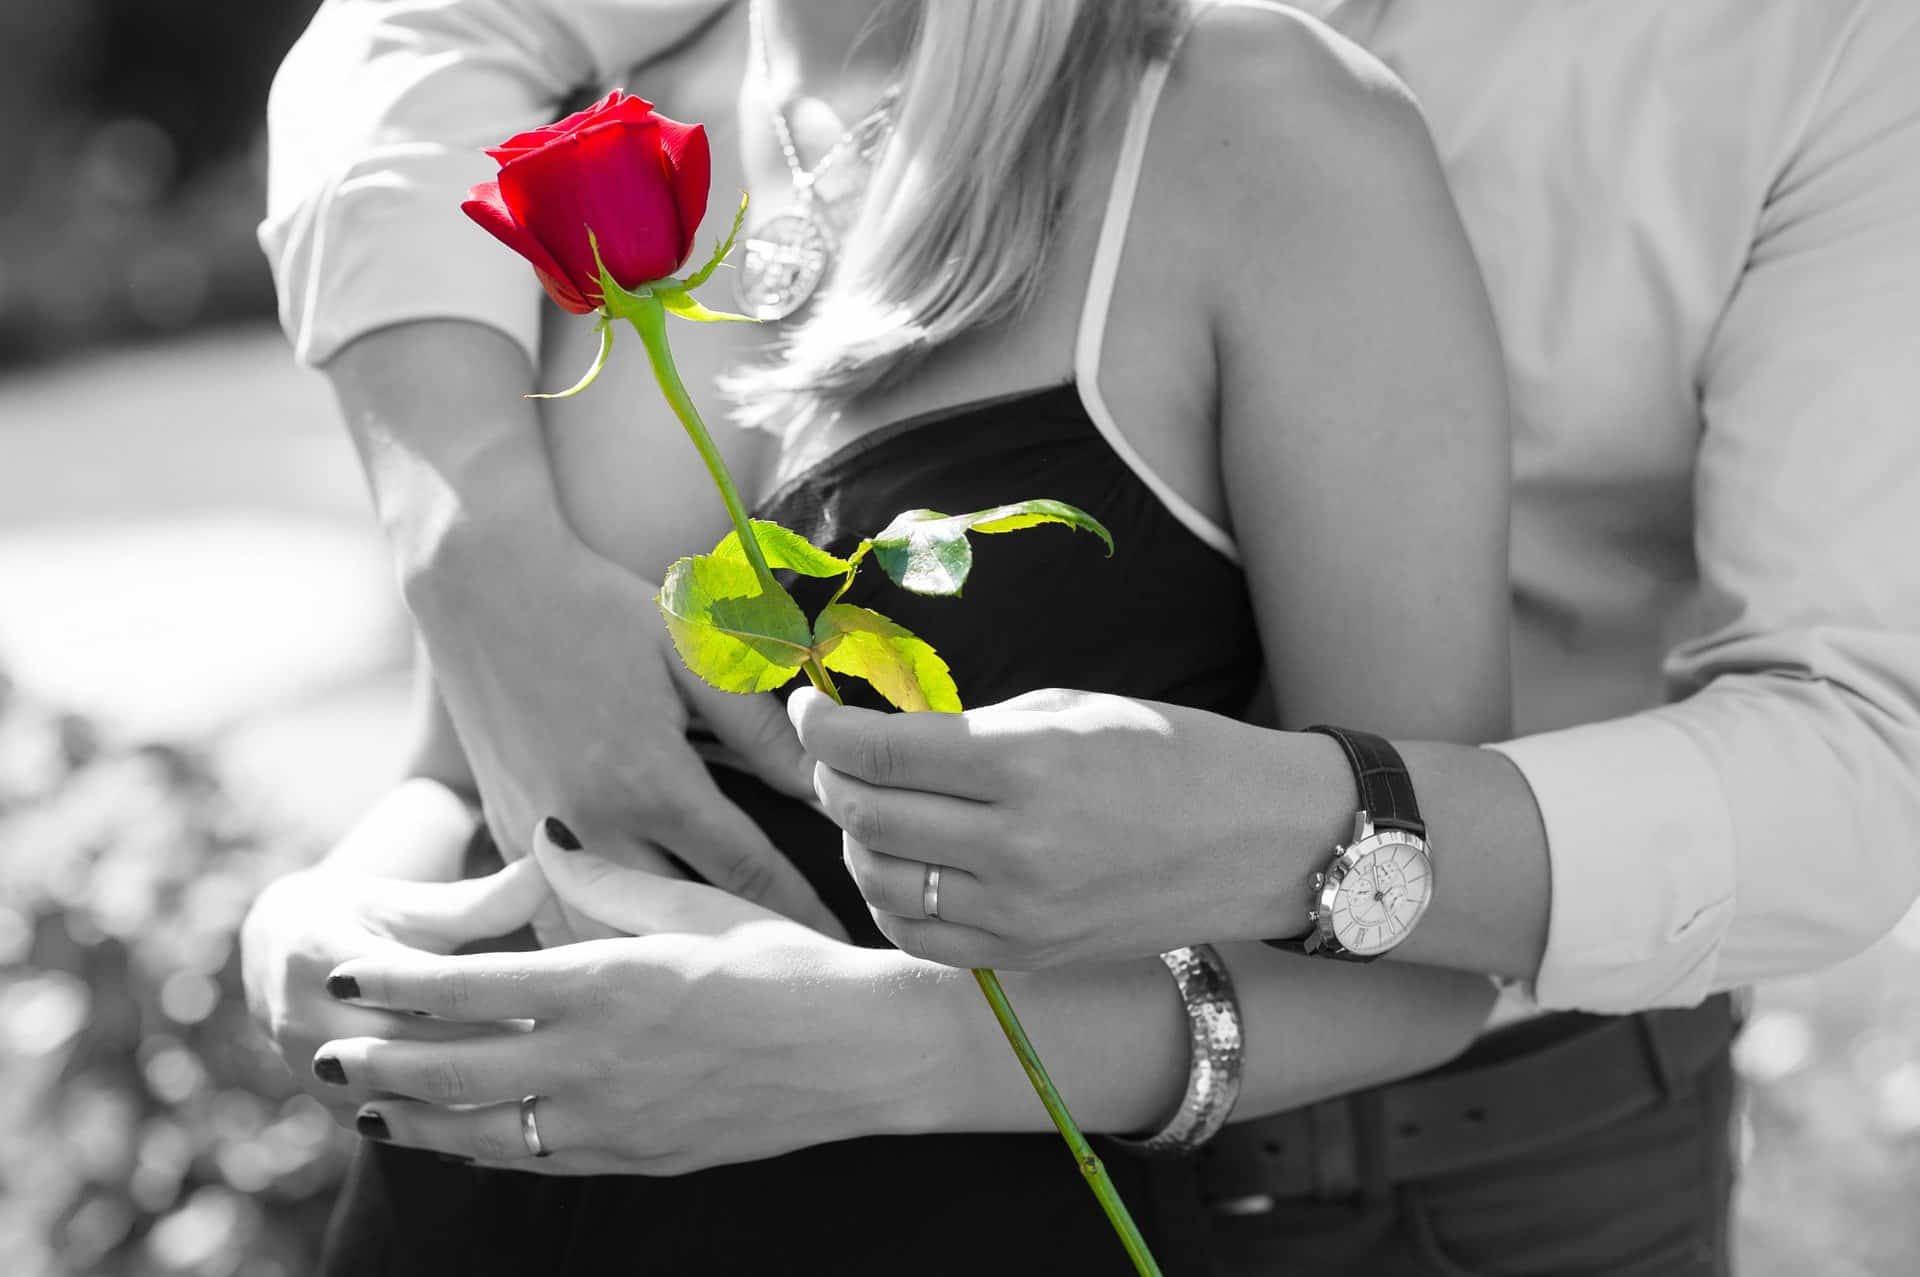 Man presenting woman with a red rose.